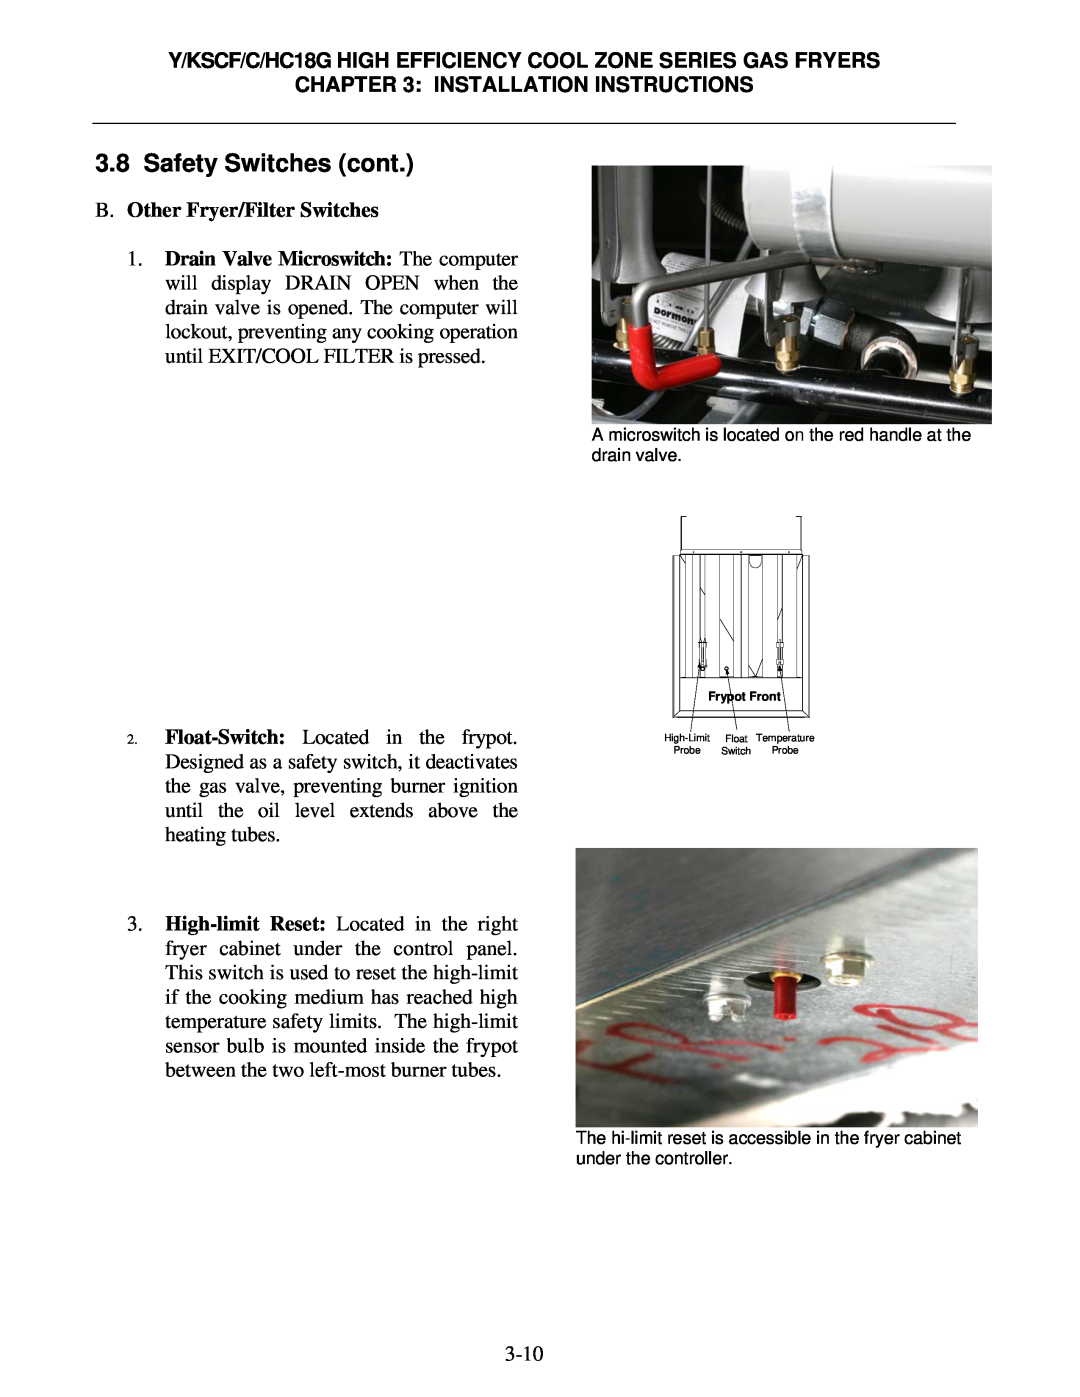 Frymaster Y/KSCF/C/HC18G operation manual Safety Switches cont, B. Other Fryer/Filter Switches, Installation Instructions 